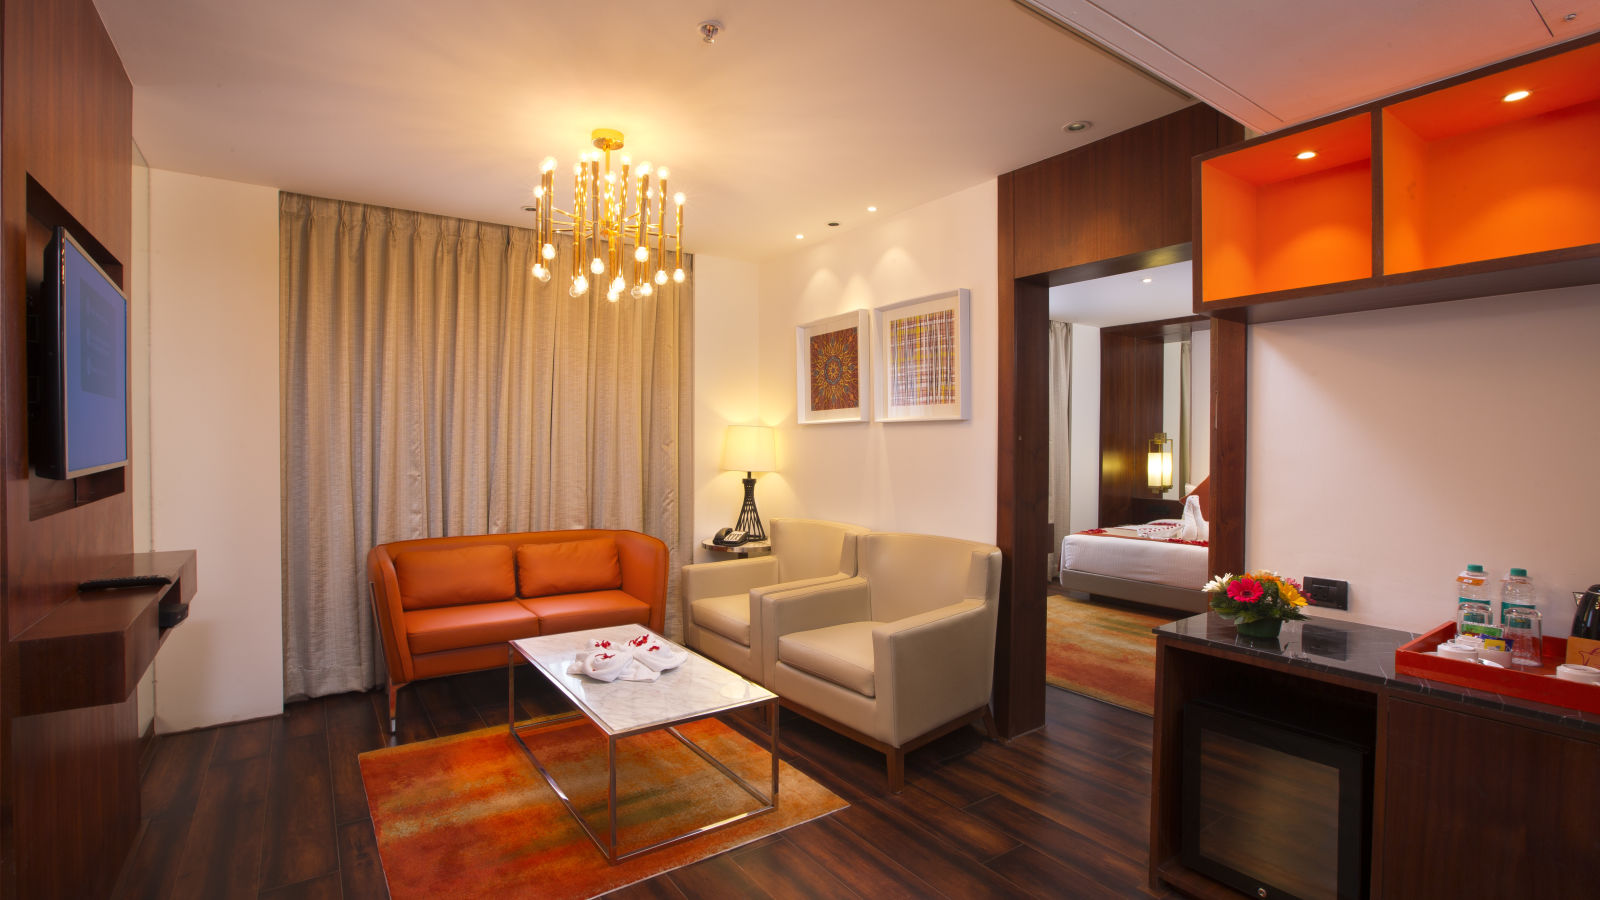 A hotel suite living area with a modern chandelier, orange leather sofa and a marble coffee table - Hotel Southend by TGI - Bommasandra, Bangalore